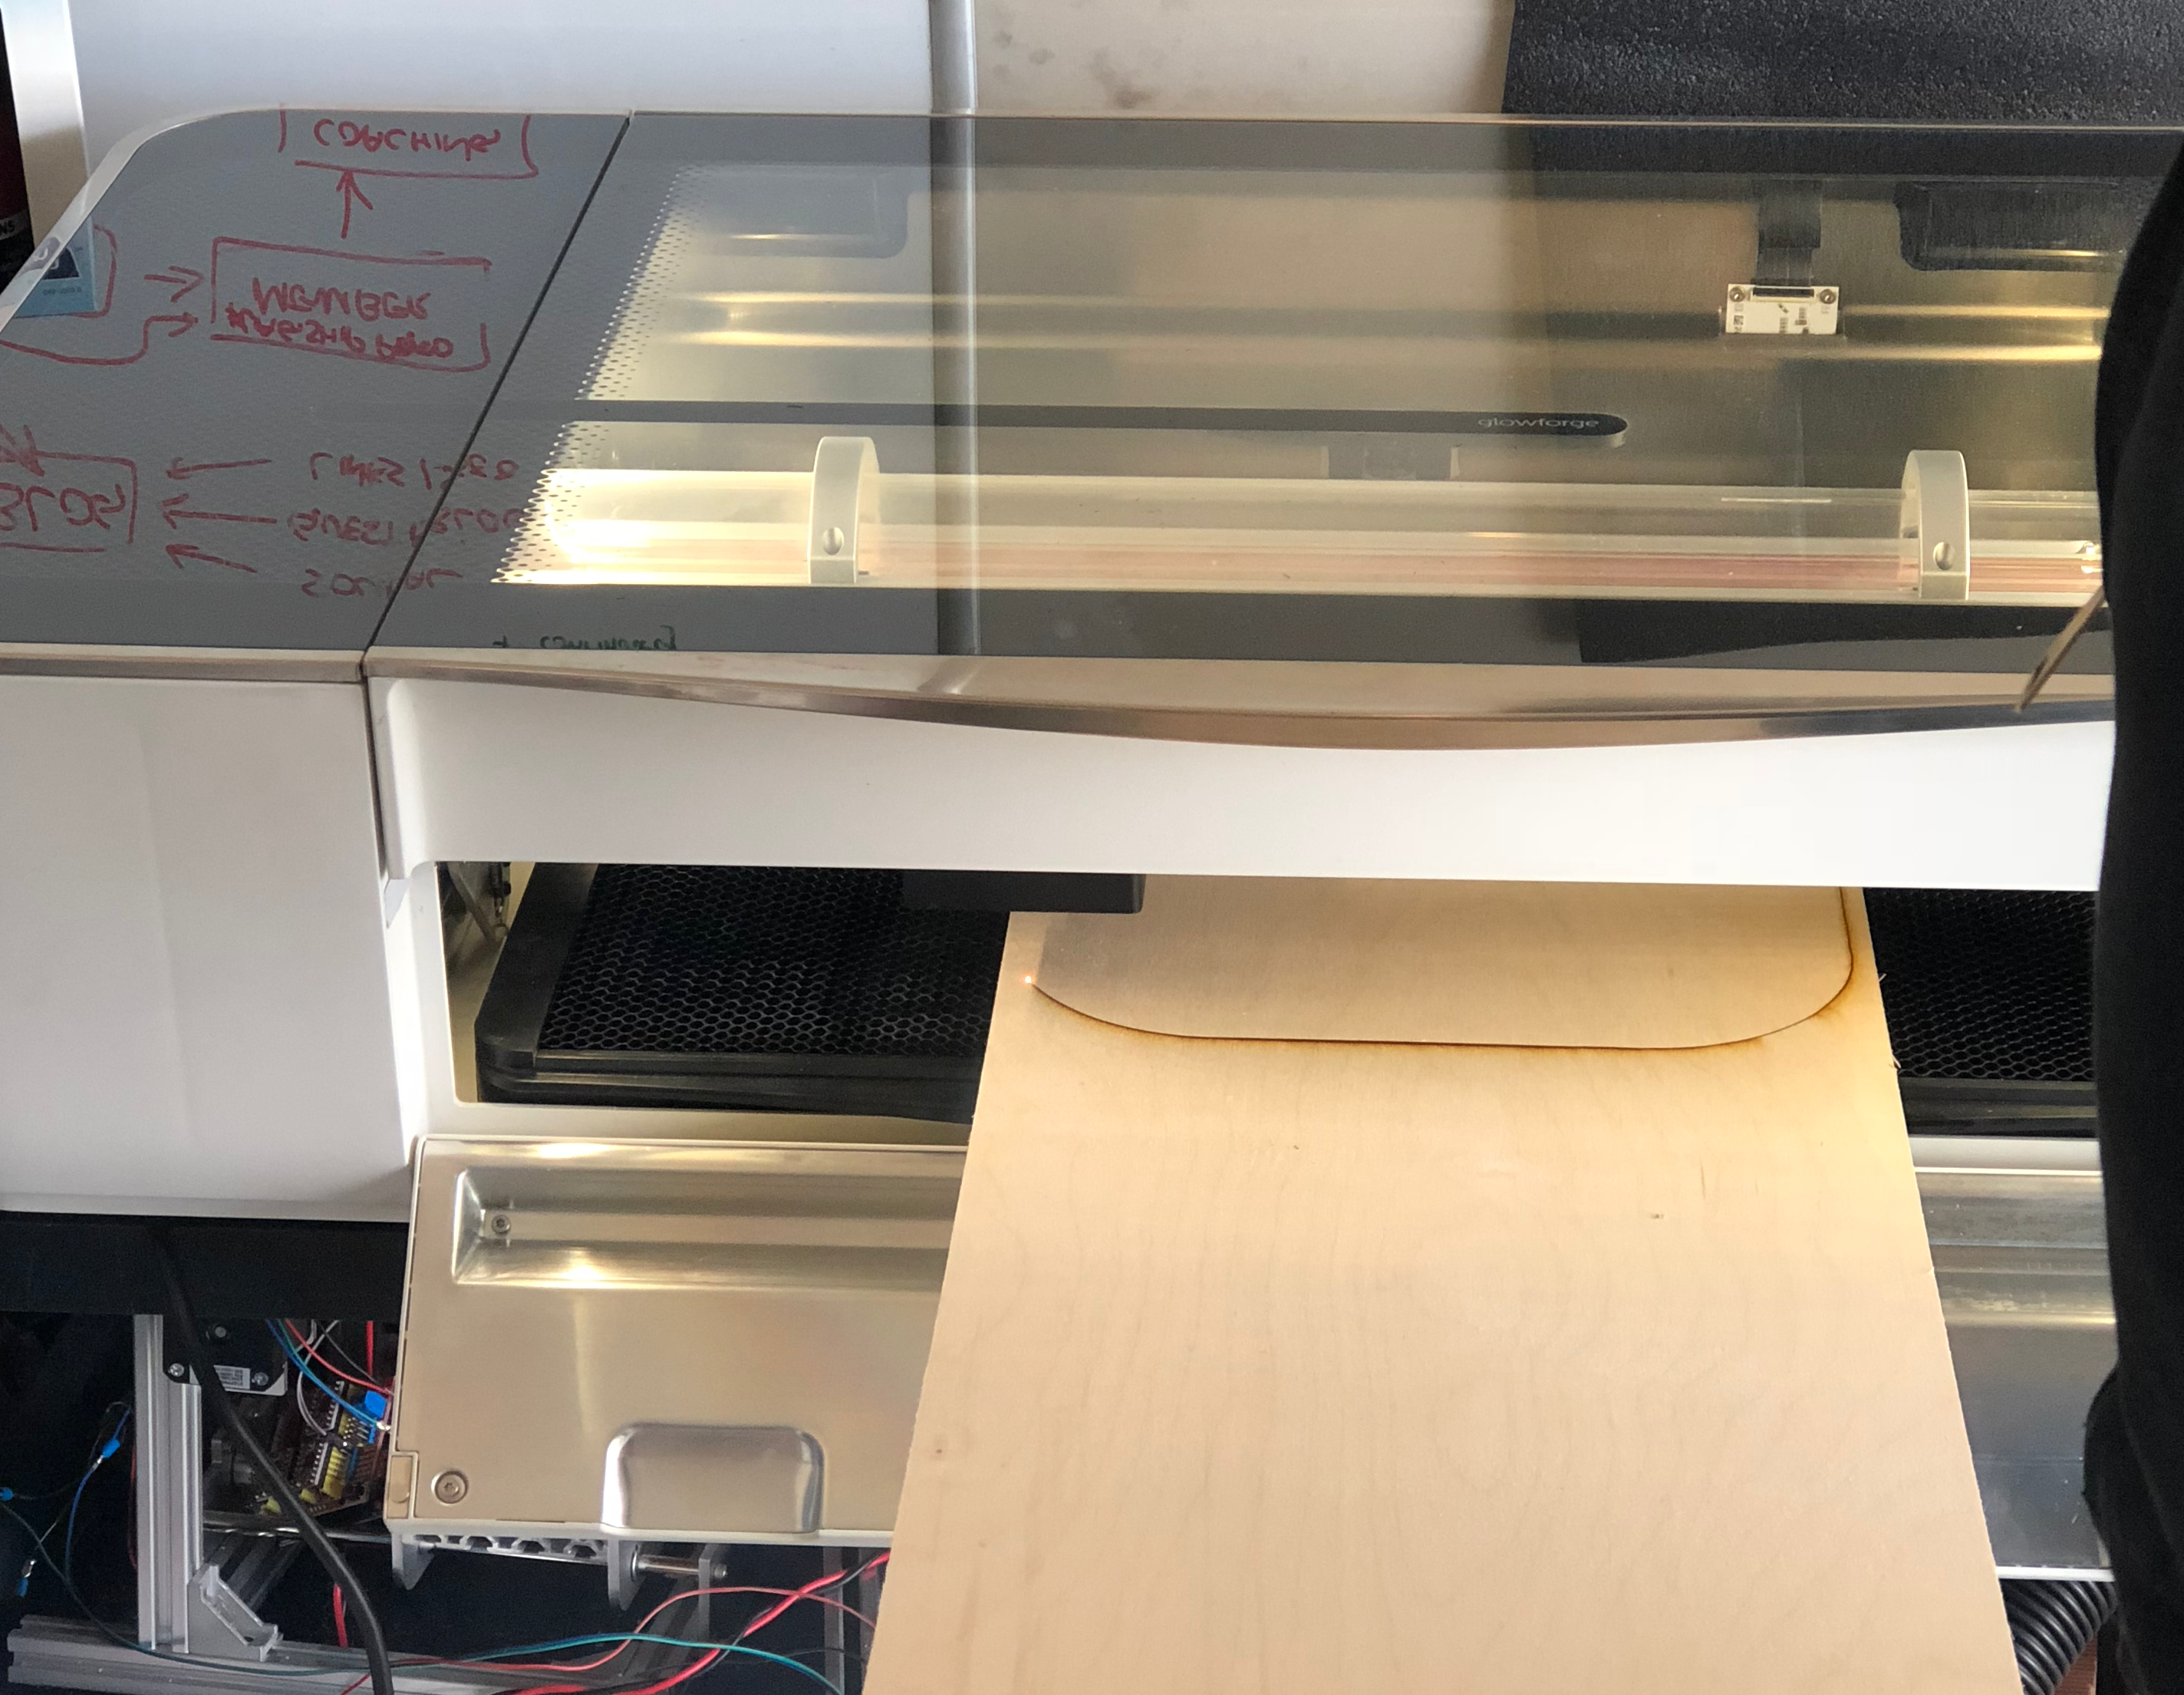 glowforge passthrough hack tricks the Glowforge front flap with magnets